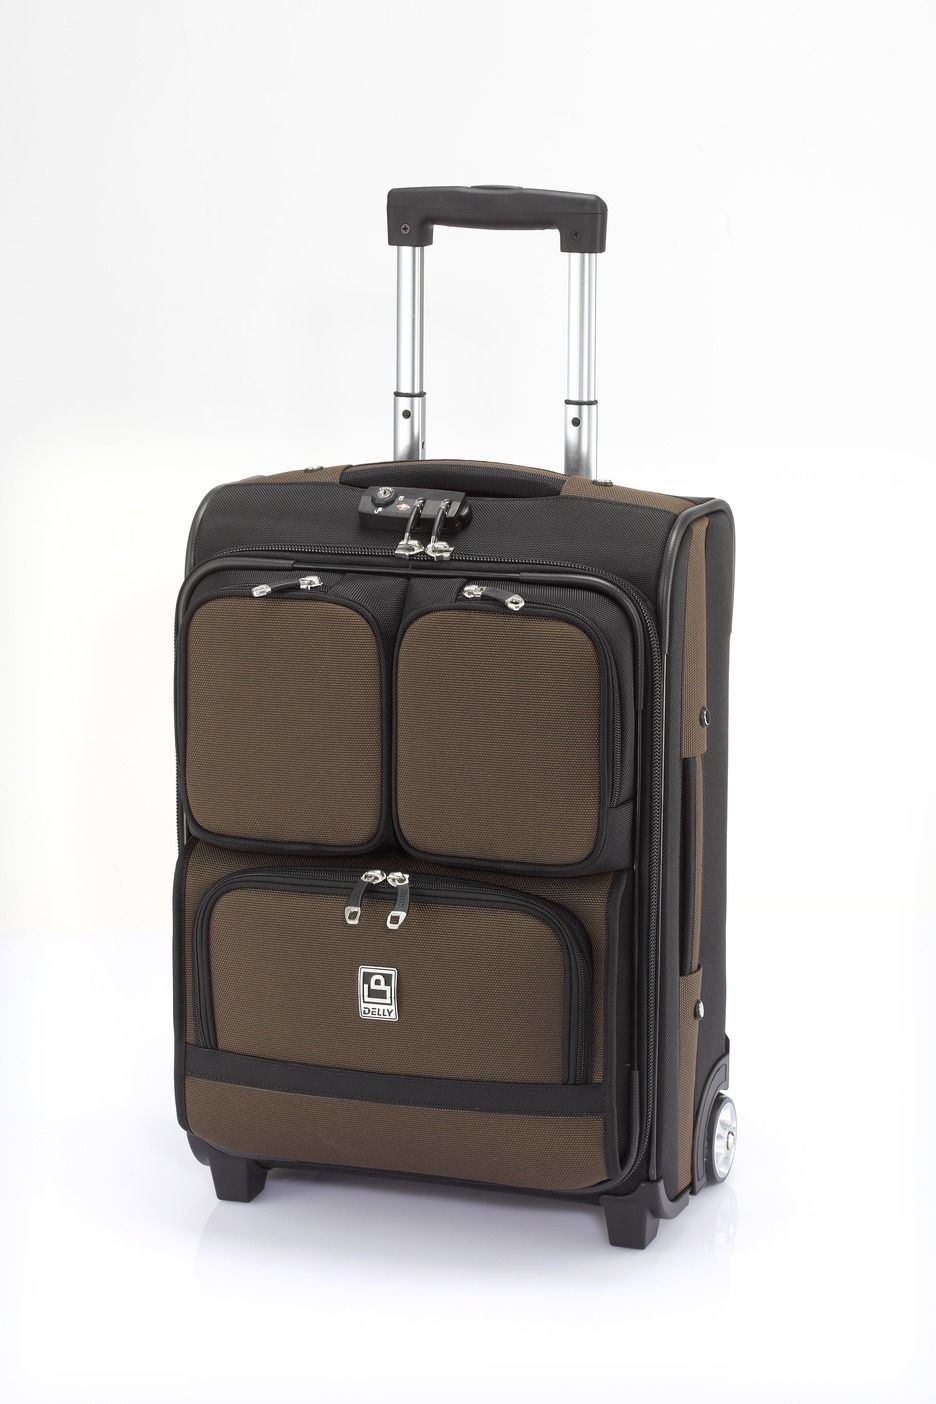 20" Multiple Outside Pockets Carry-On Baggage - Easy to store or take out goods